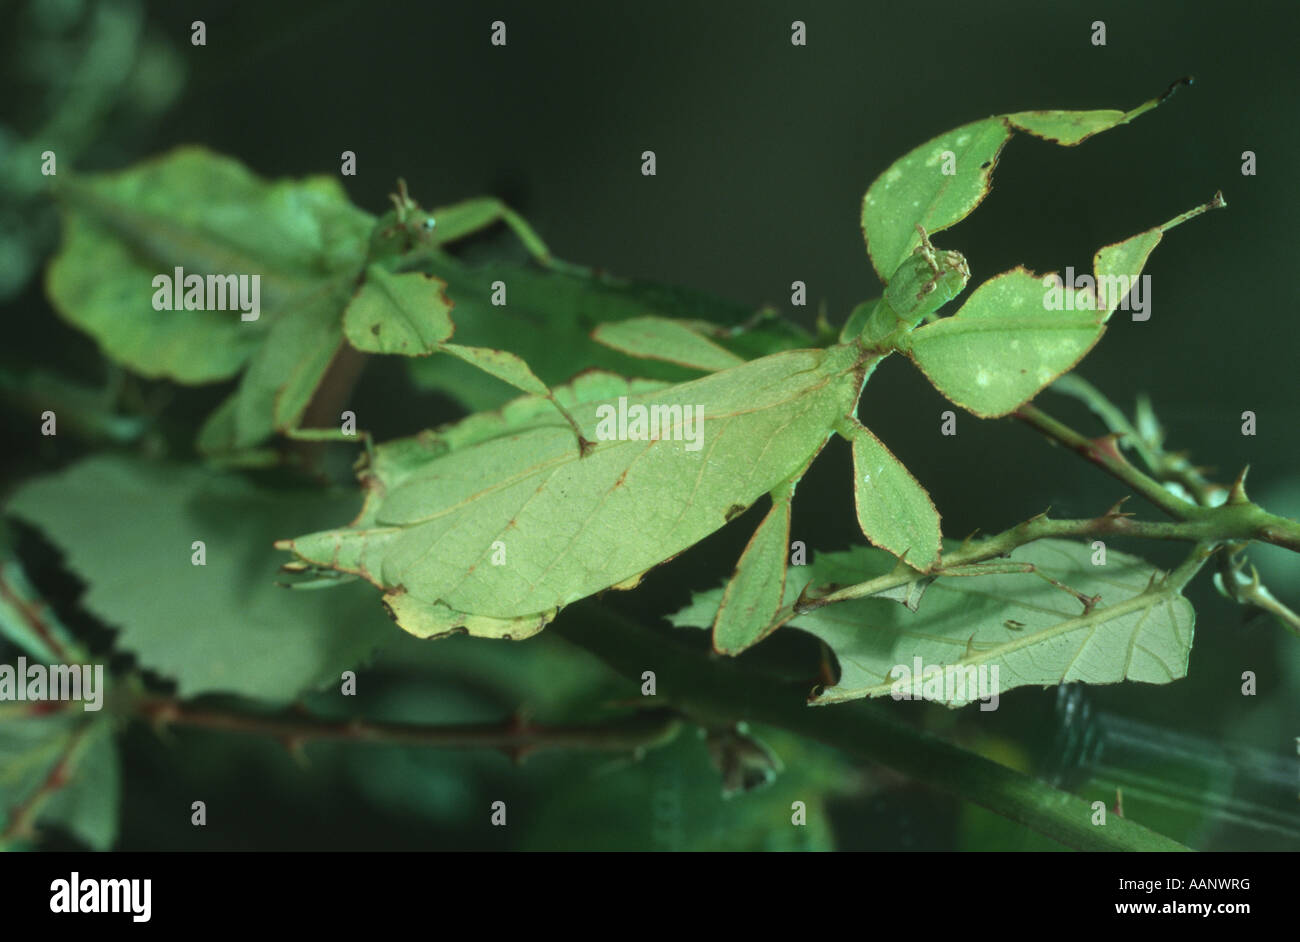 Javan Leaf-Insect, leaf insect (Phyllium bioculatum), camouflaged as a leaf Stock Photo